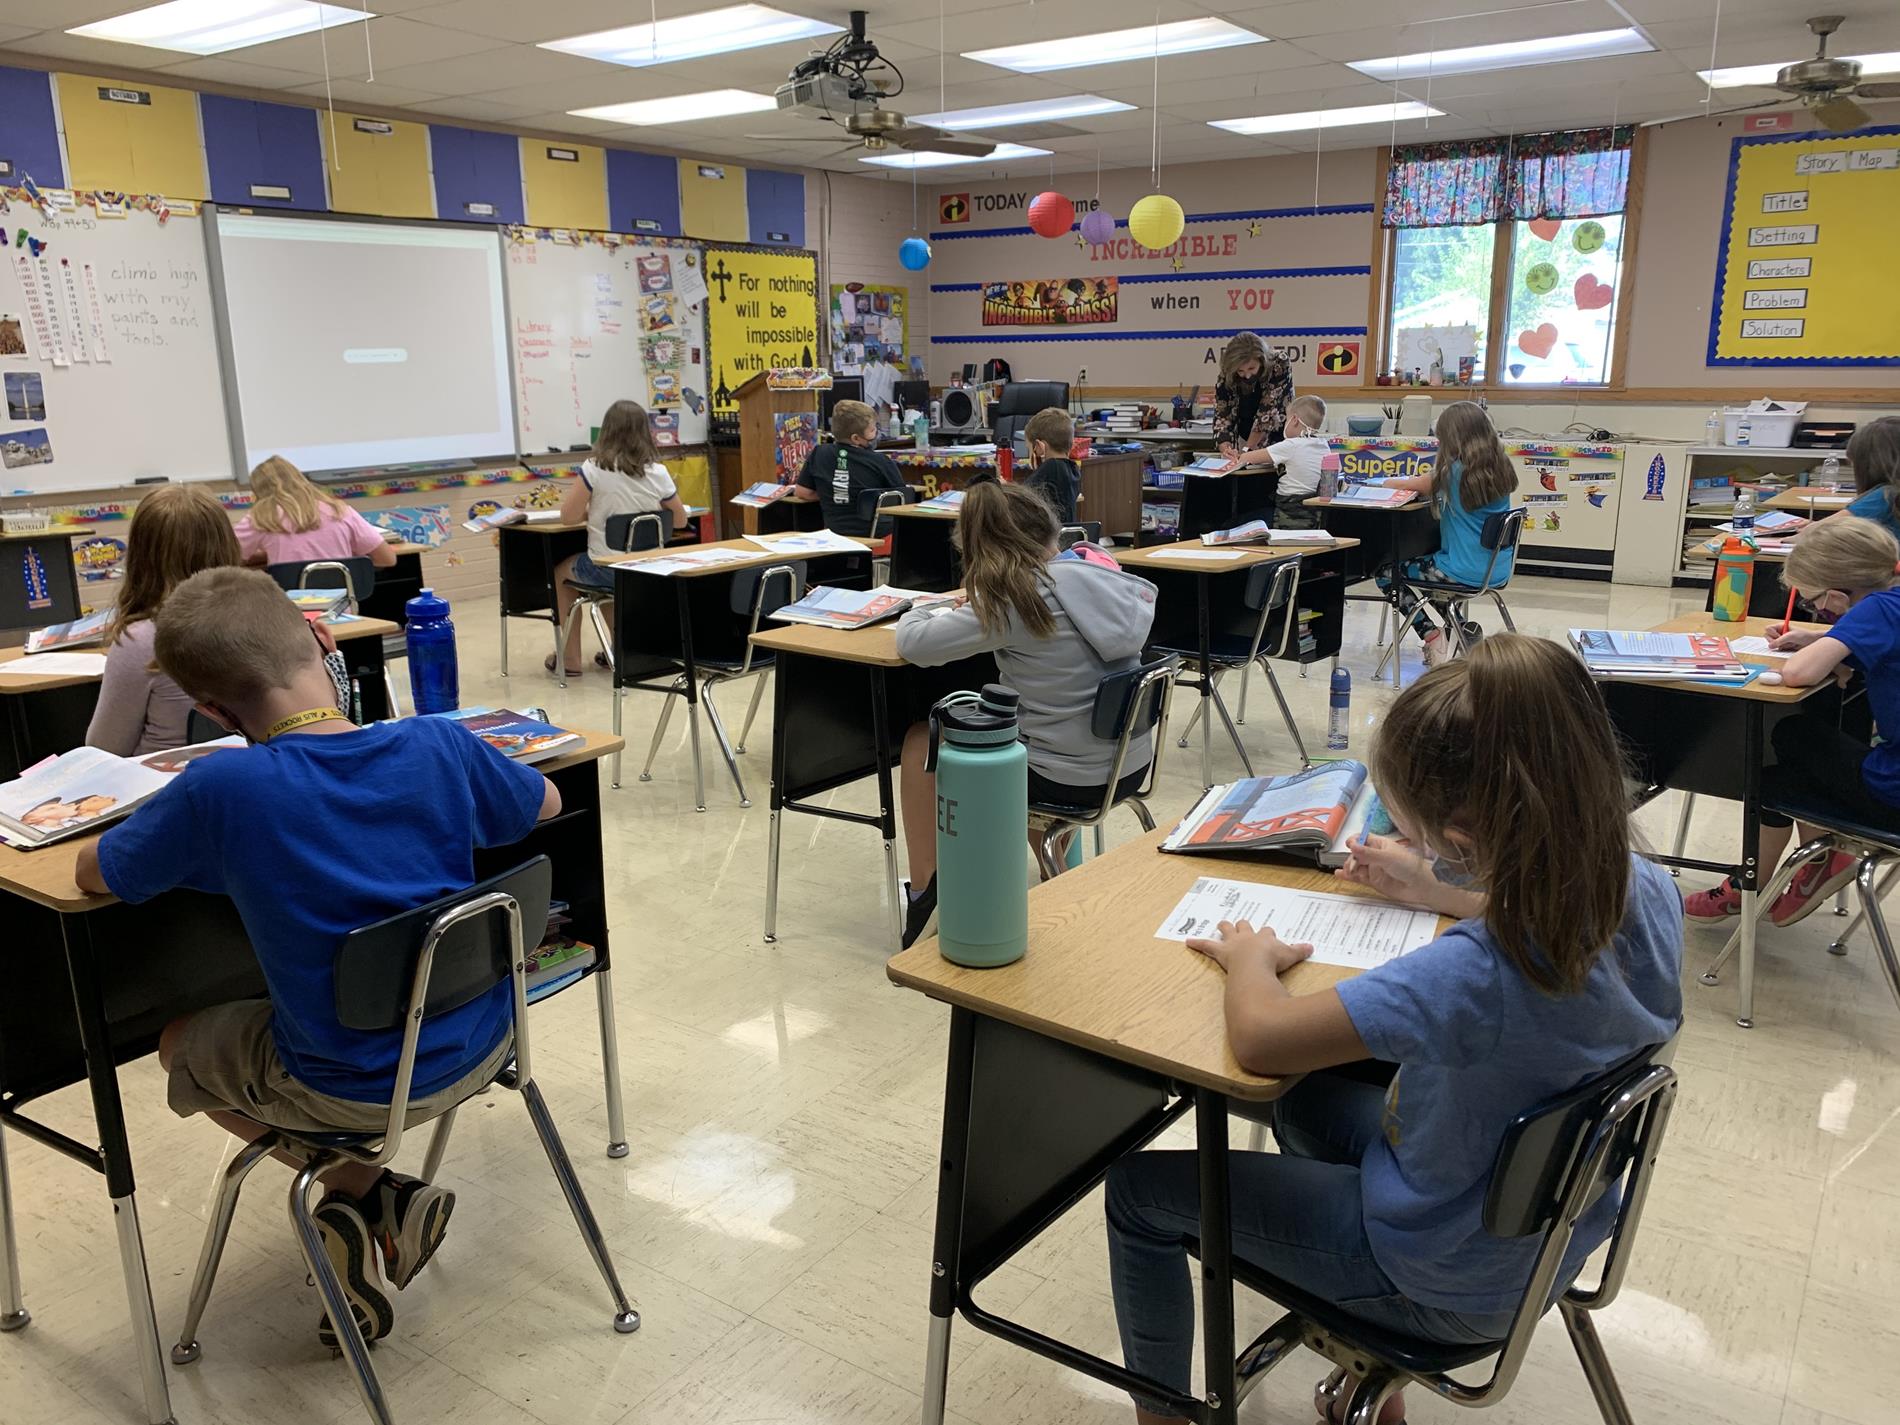 3rd Grade students working at their desks.